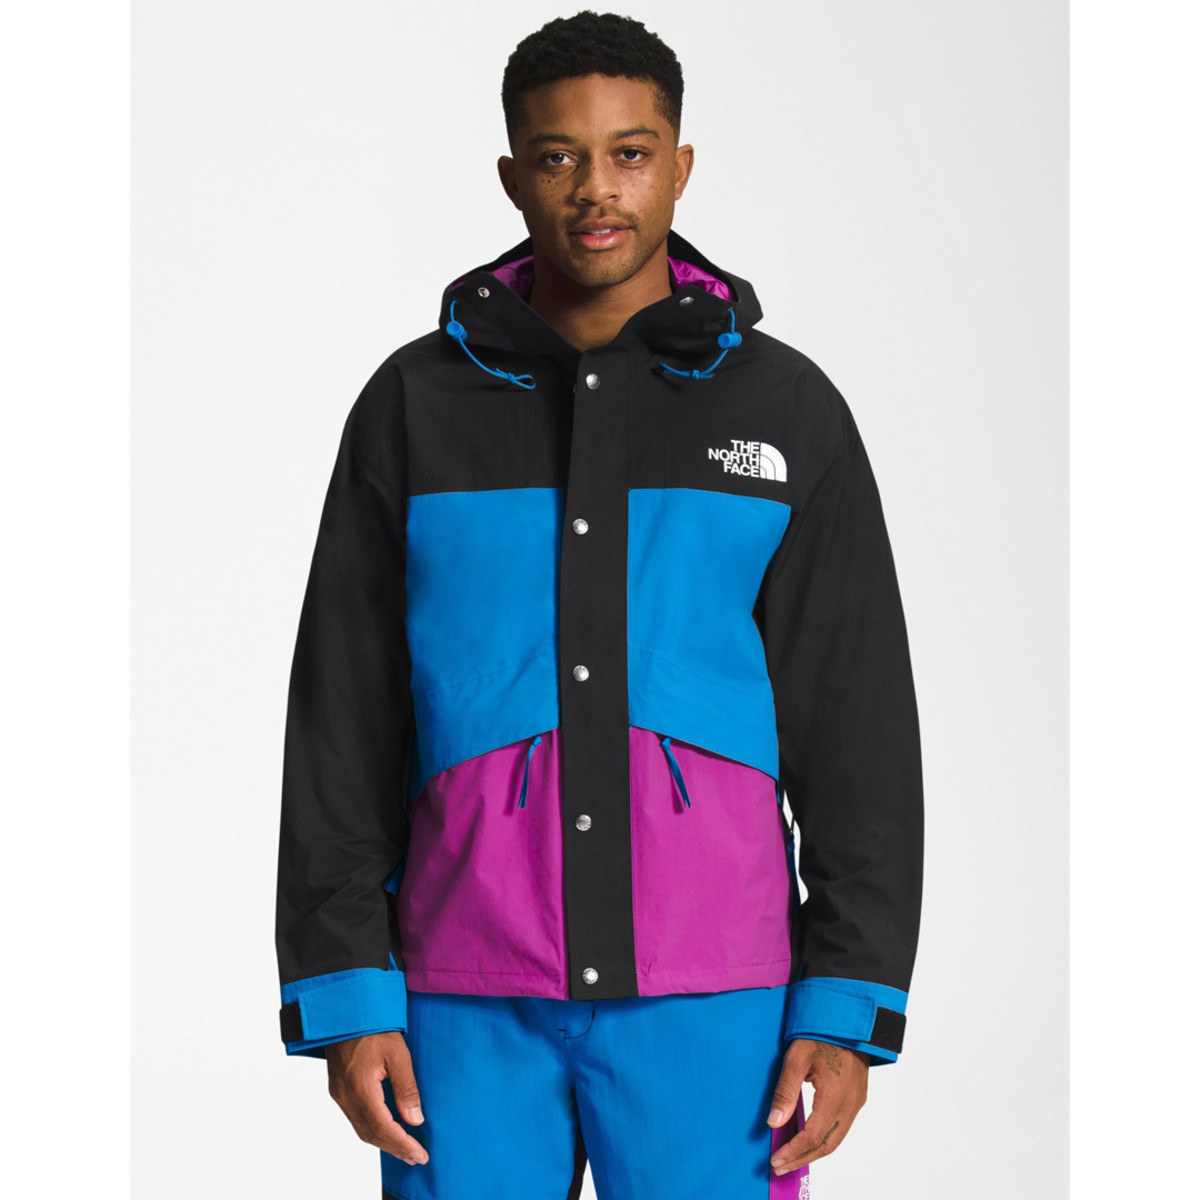 The North Face 86 Retro Mountain Rain Jacket Is 50% Off - Men's Journal